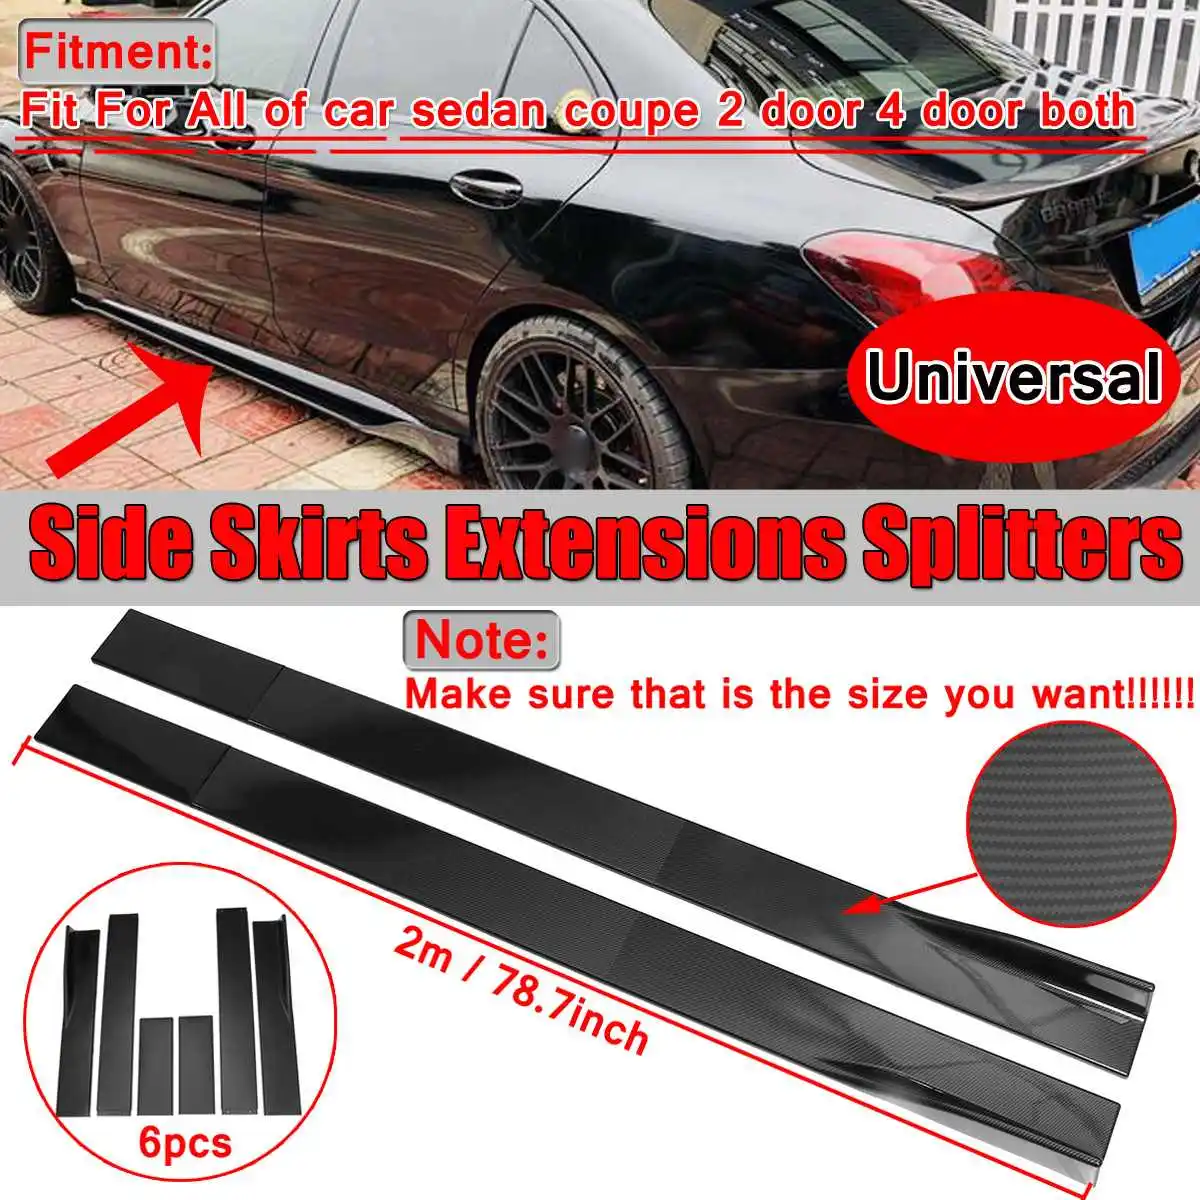 

6pcs 2m/2.2m Universal Car Side Skirts Winglet Extensions Splitters Body Apron Lip For BMW For Benz For Audi Carbon Look/Black